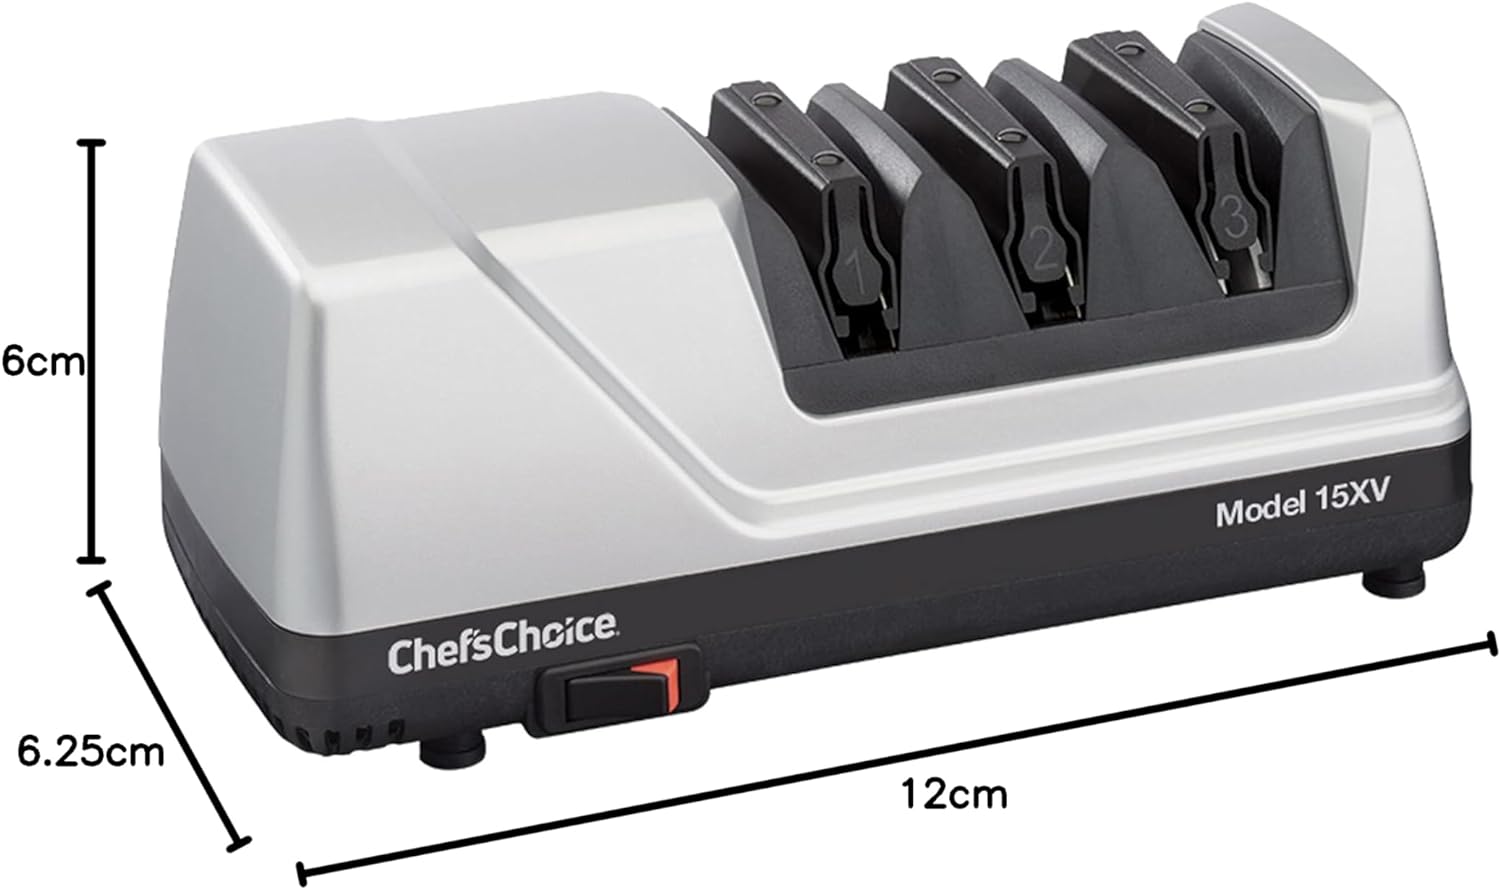 Chef’sChoice 15XV Professional Electric Knife Sharpener with 100-Percent Diamond Abrasives and Precision Angle Guides for Straight Edge and Serrated Knives, 3-Stage, Metallic